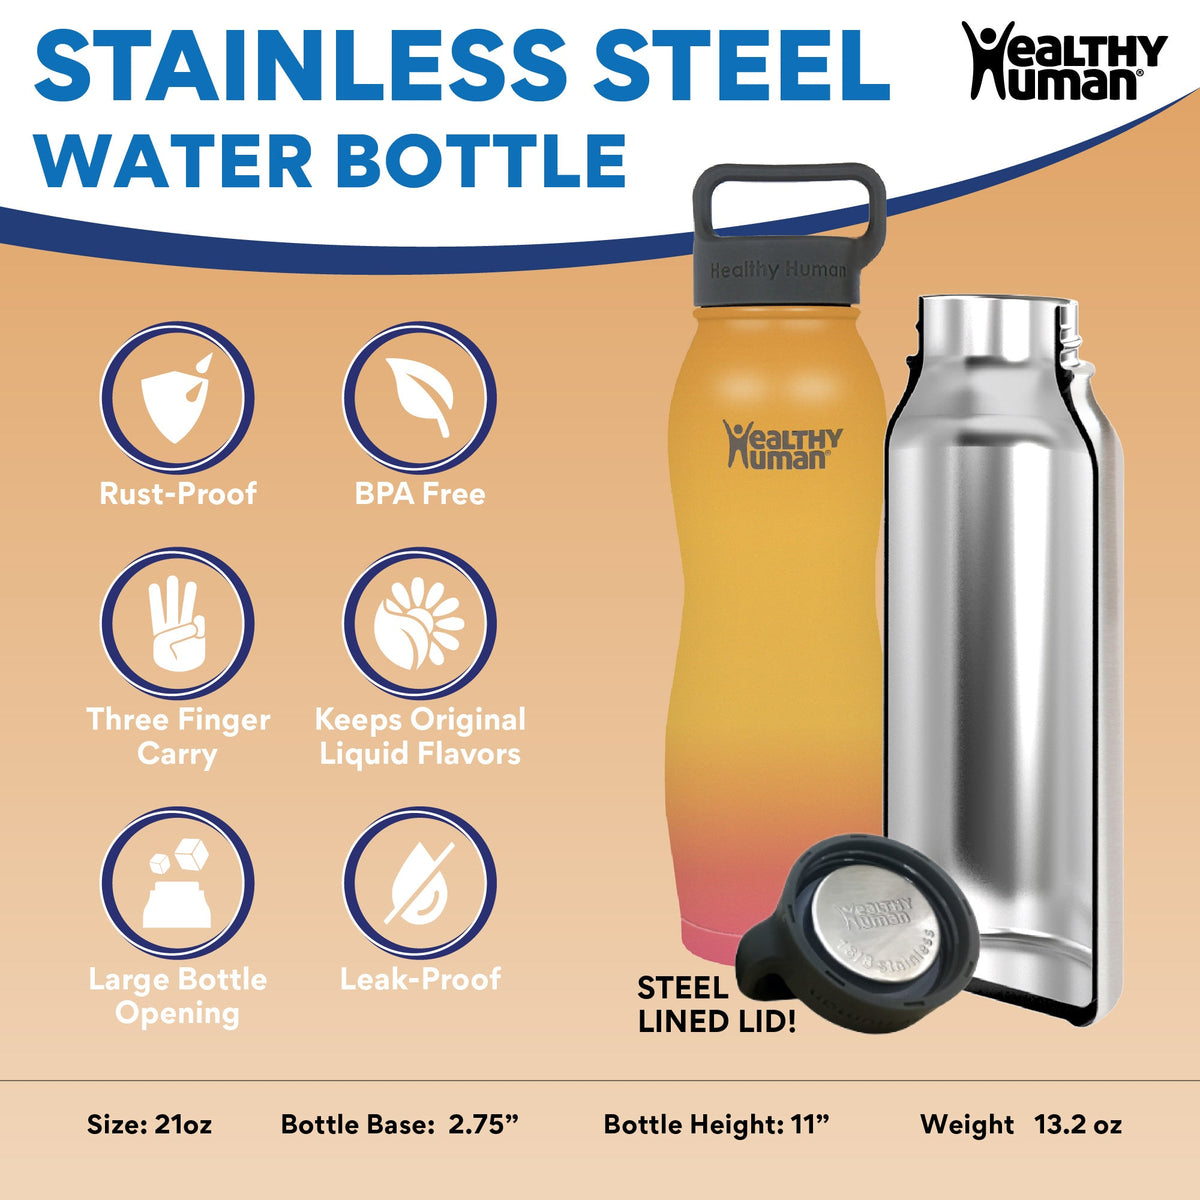 Big Mouth Stainless Steel Water Bottle | 32oz. | Combat Corner